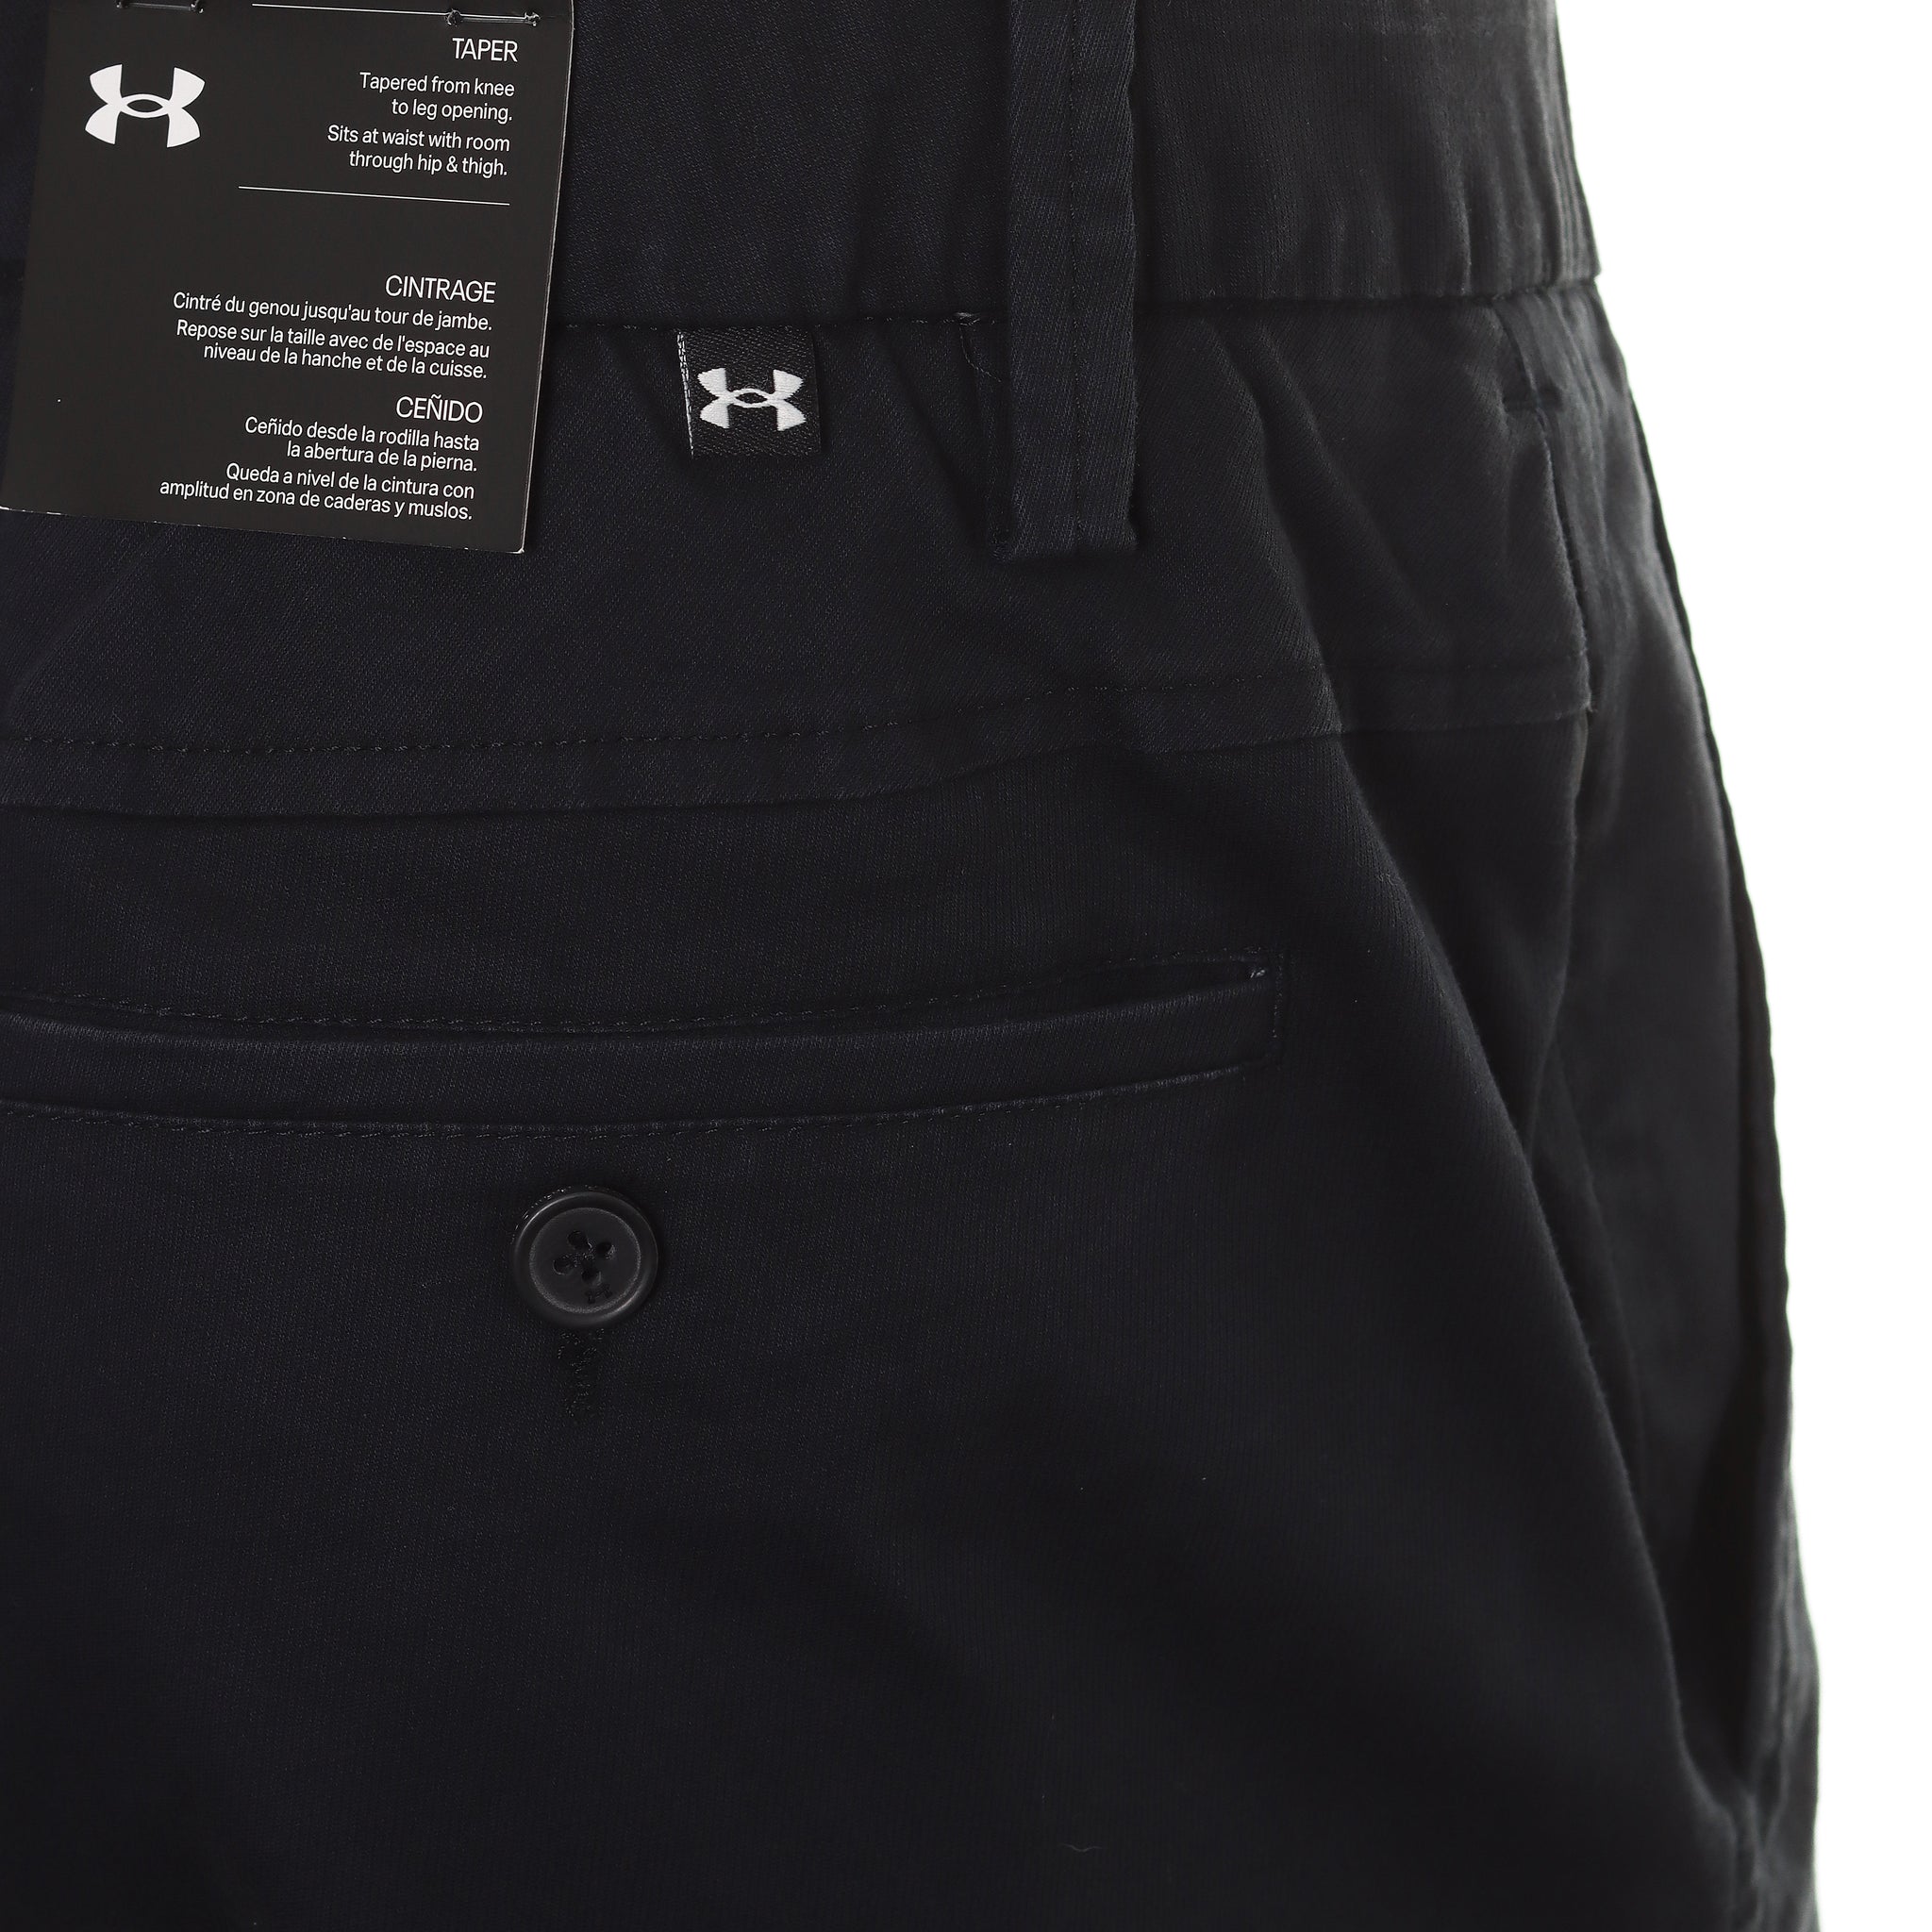 under-armour-golf-ua-chino-tapered-pants-1370081-black-001